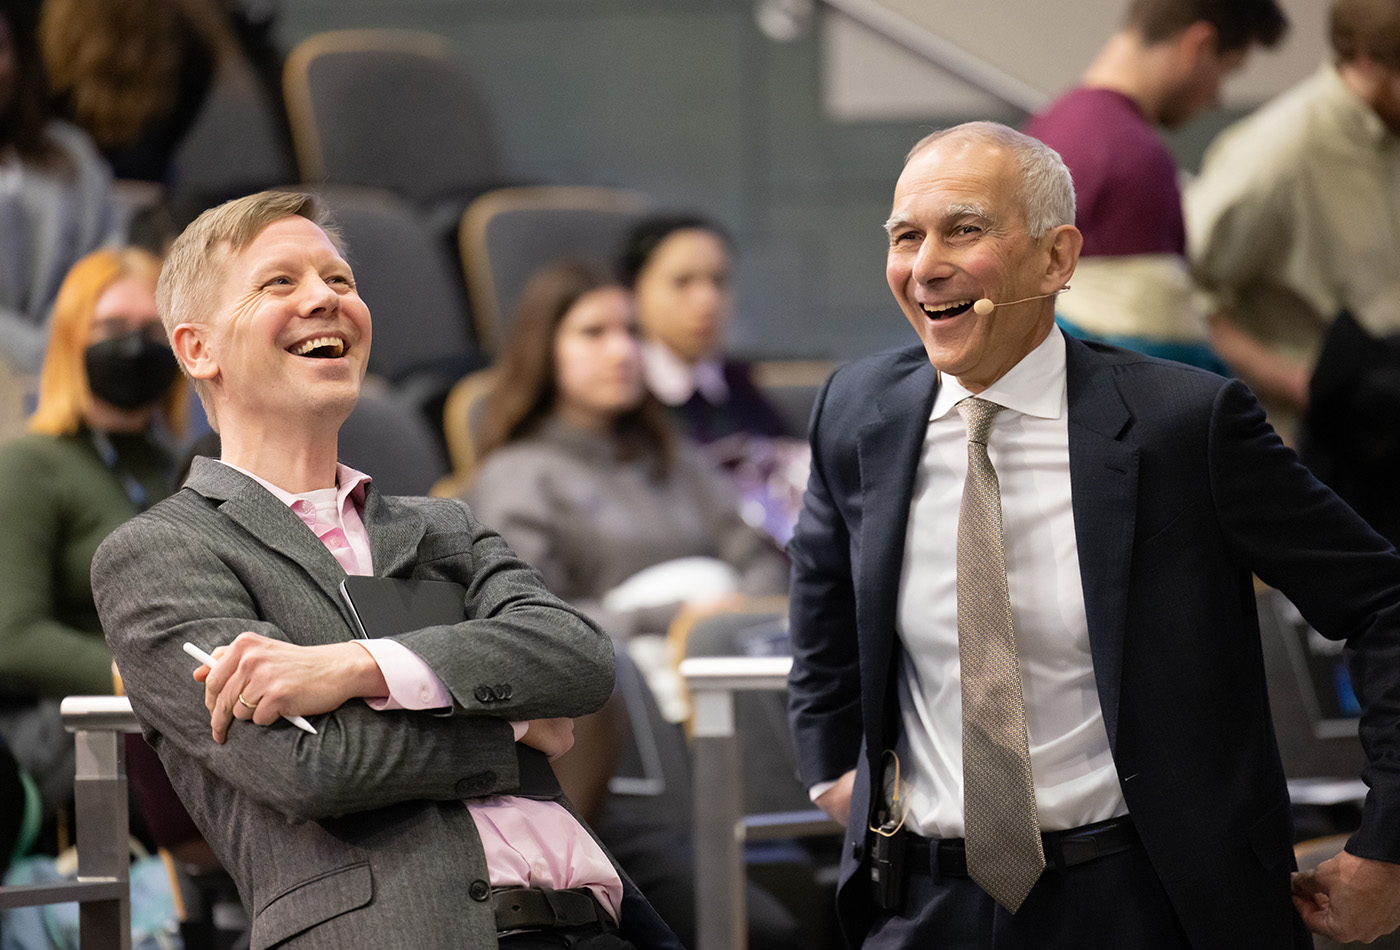 Two men wearing suits laugh together in a lecture hall.